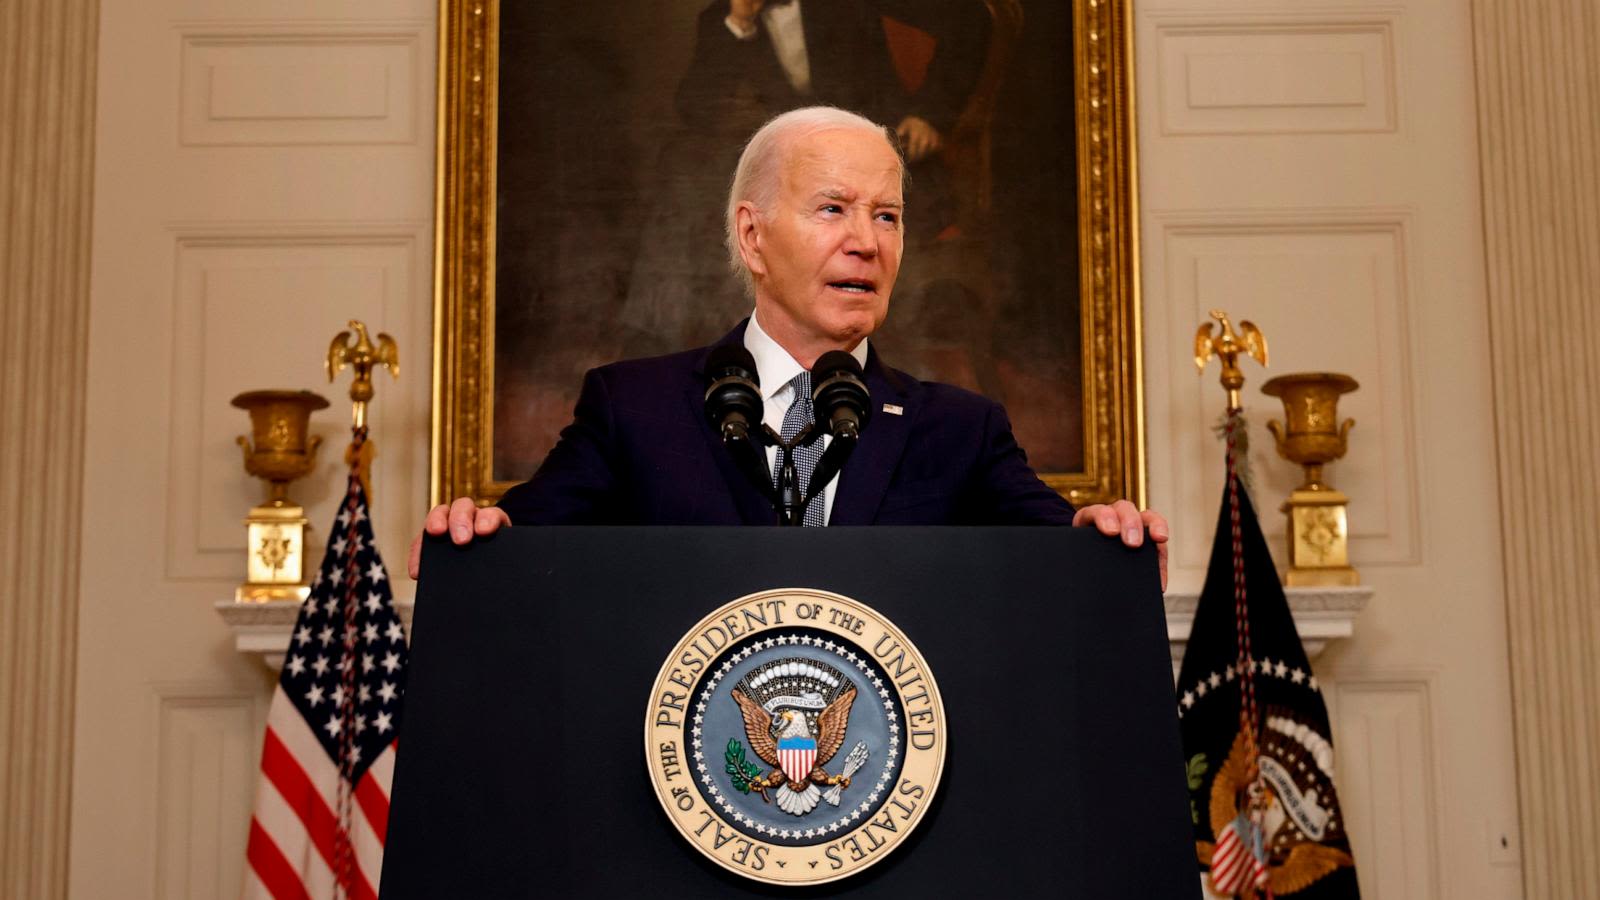 Biden says only Hamas stands in way of cease-fire, but questions about Israel remain